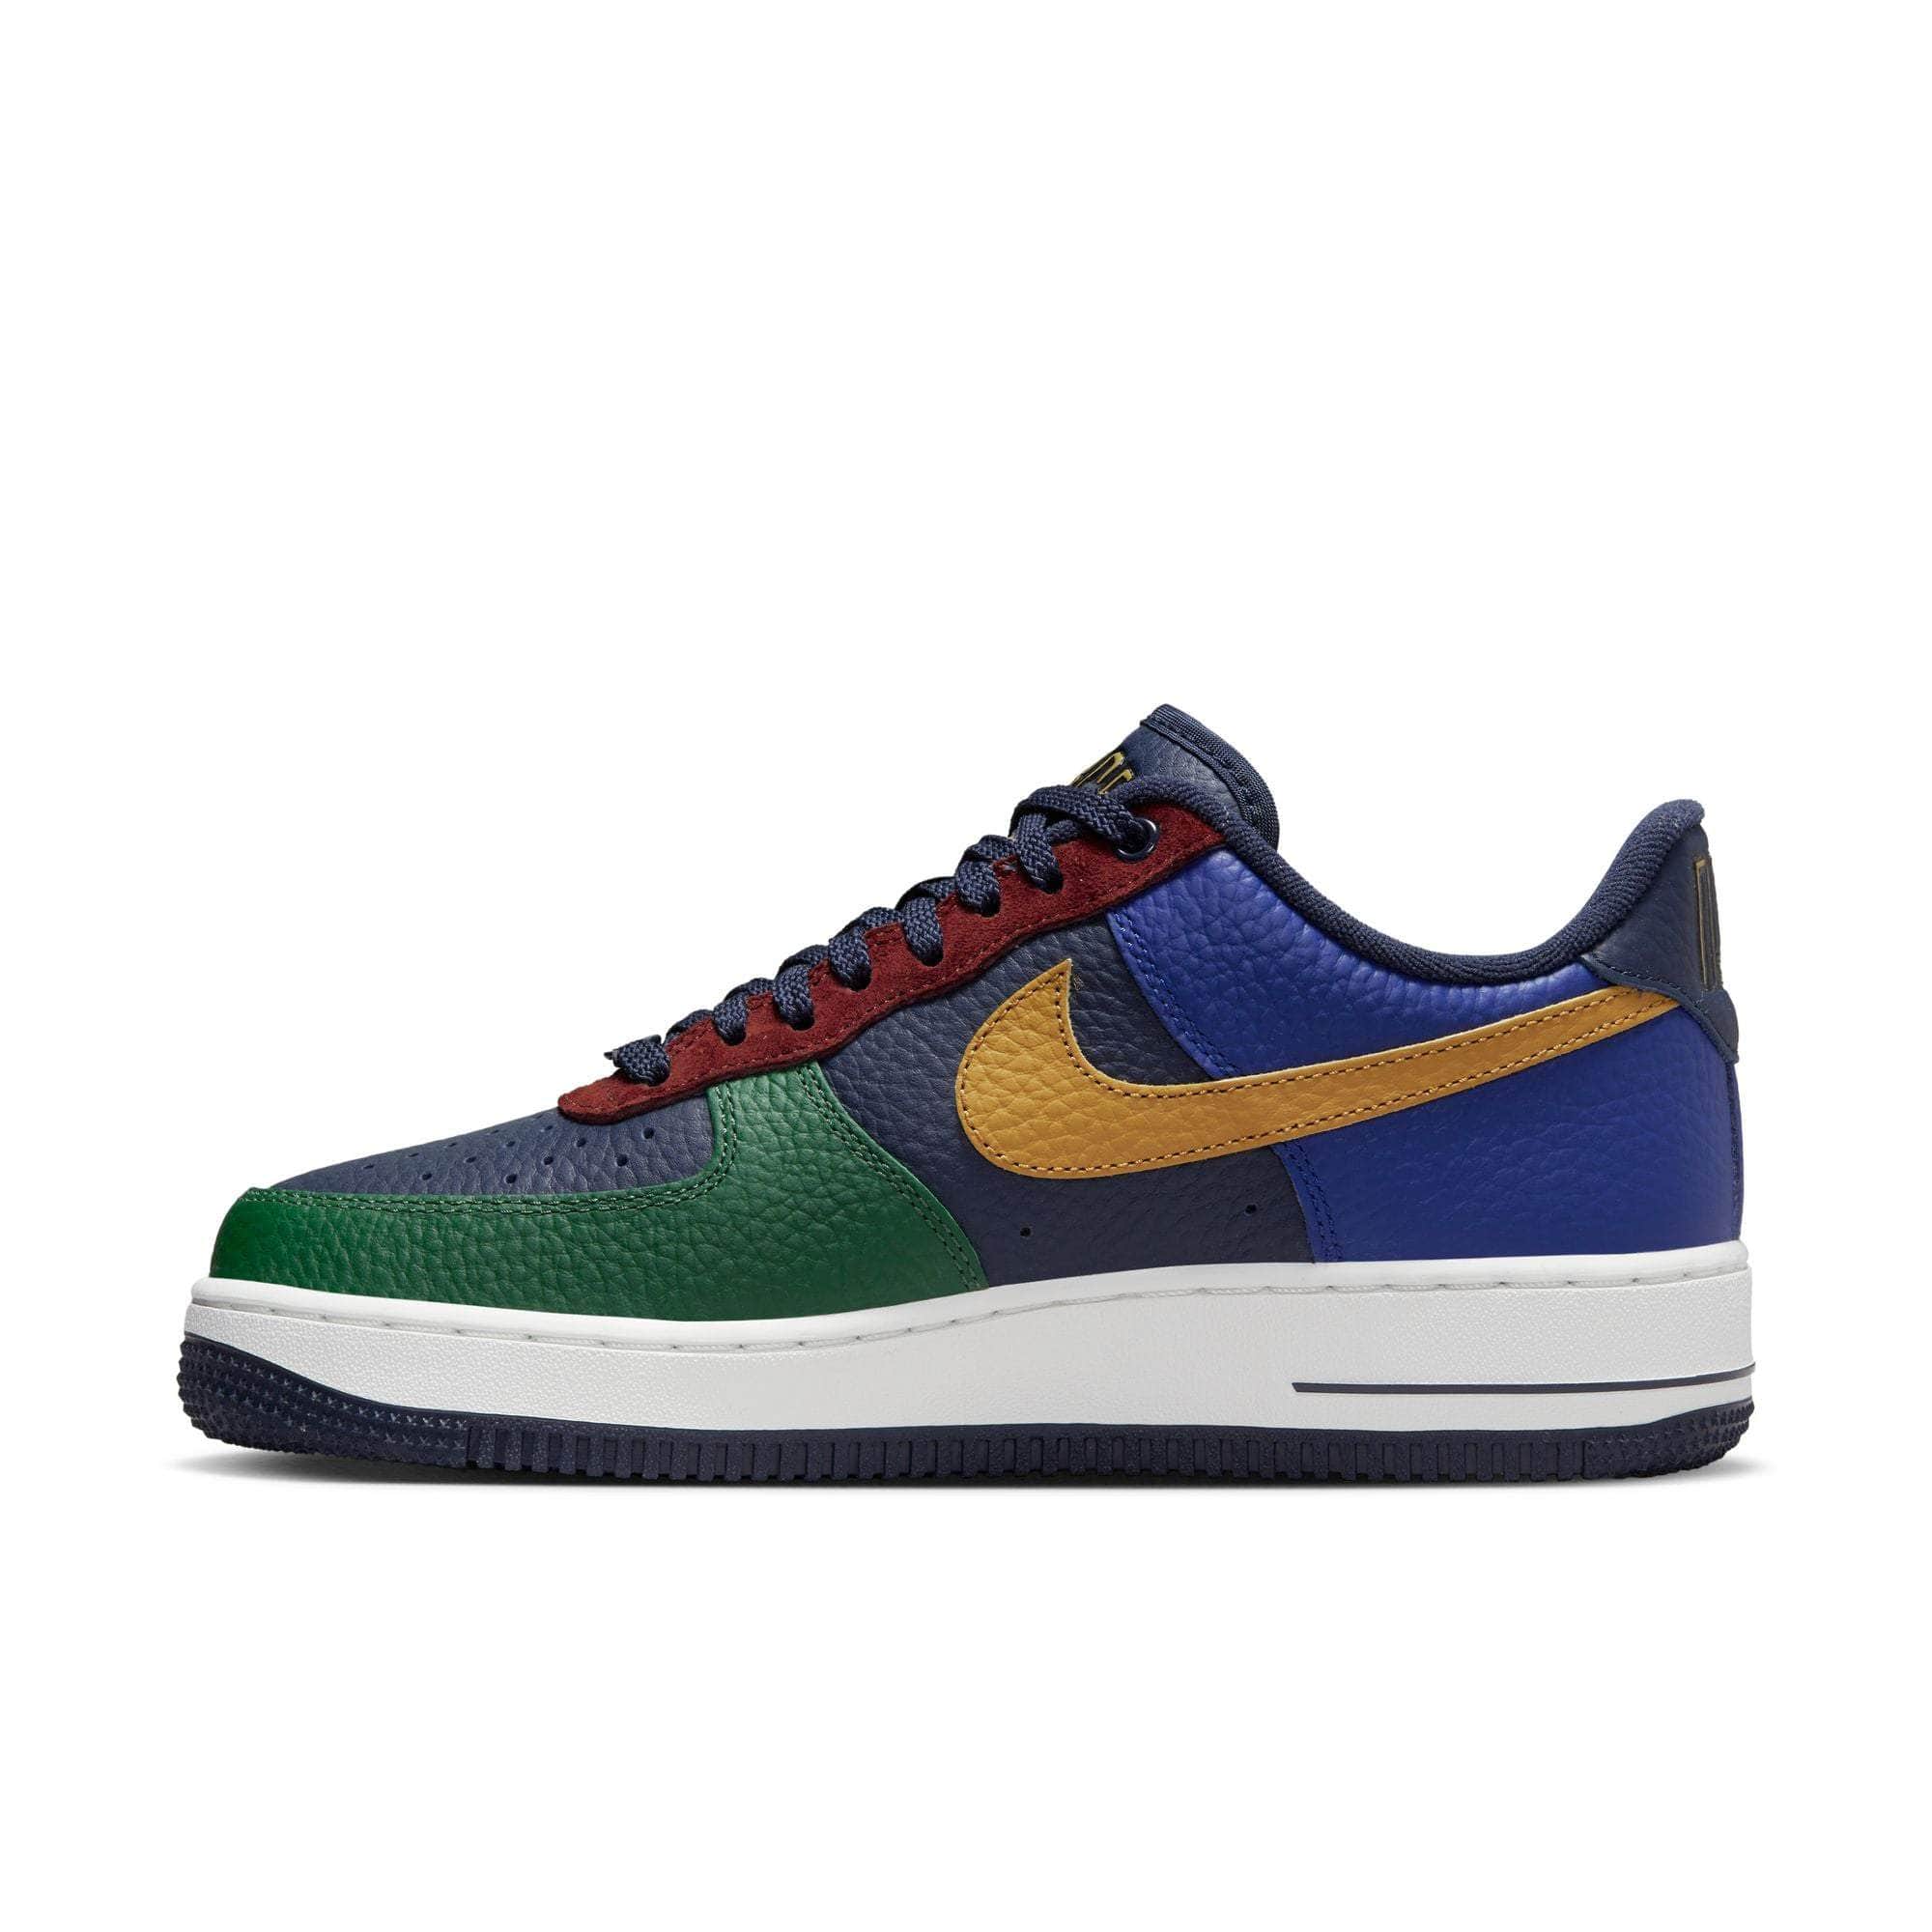 maximaliseren Circulaire Realistisch Nike Air Force 1 '07 "Obsidian and Gorge Green" - Women's - GBNY